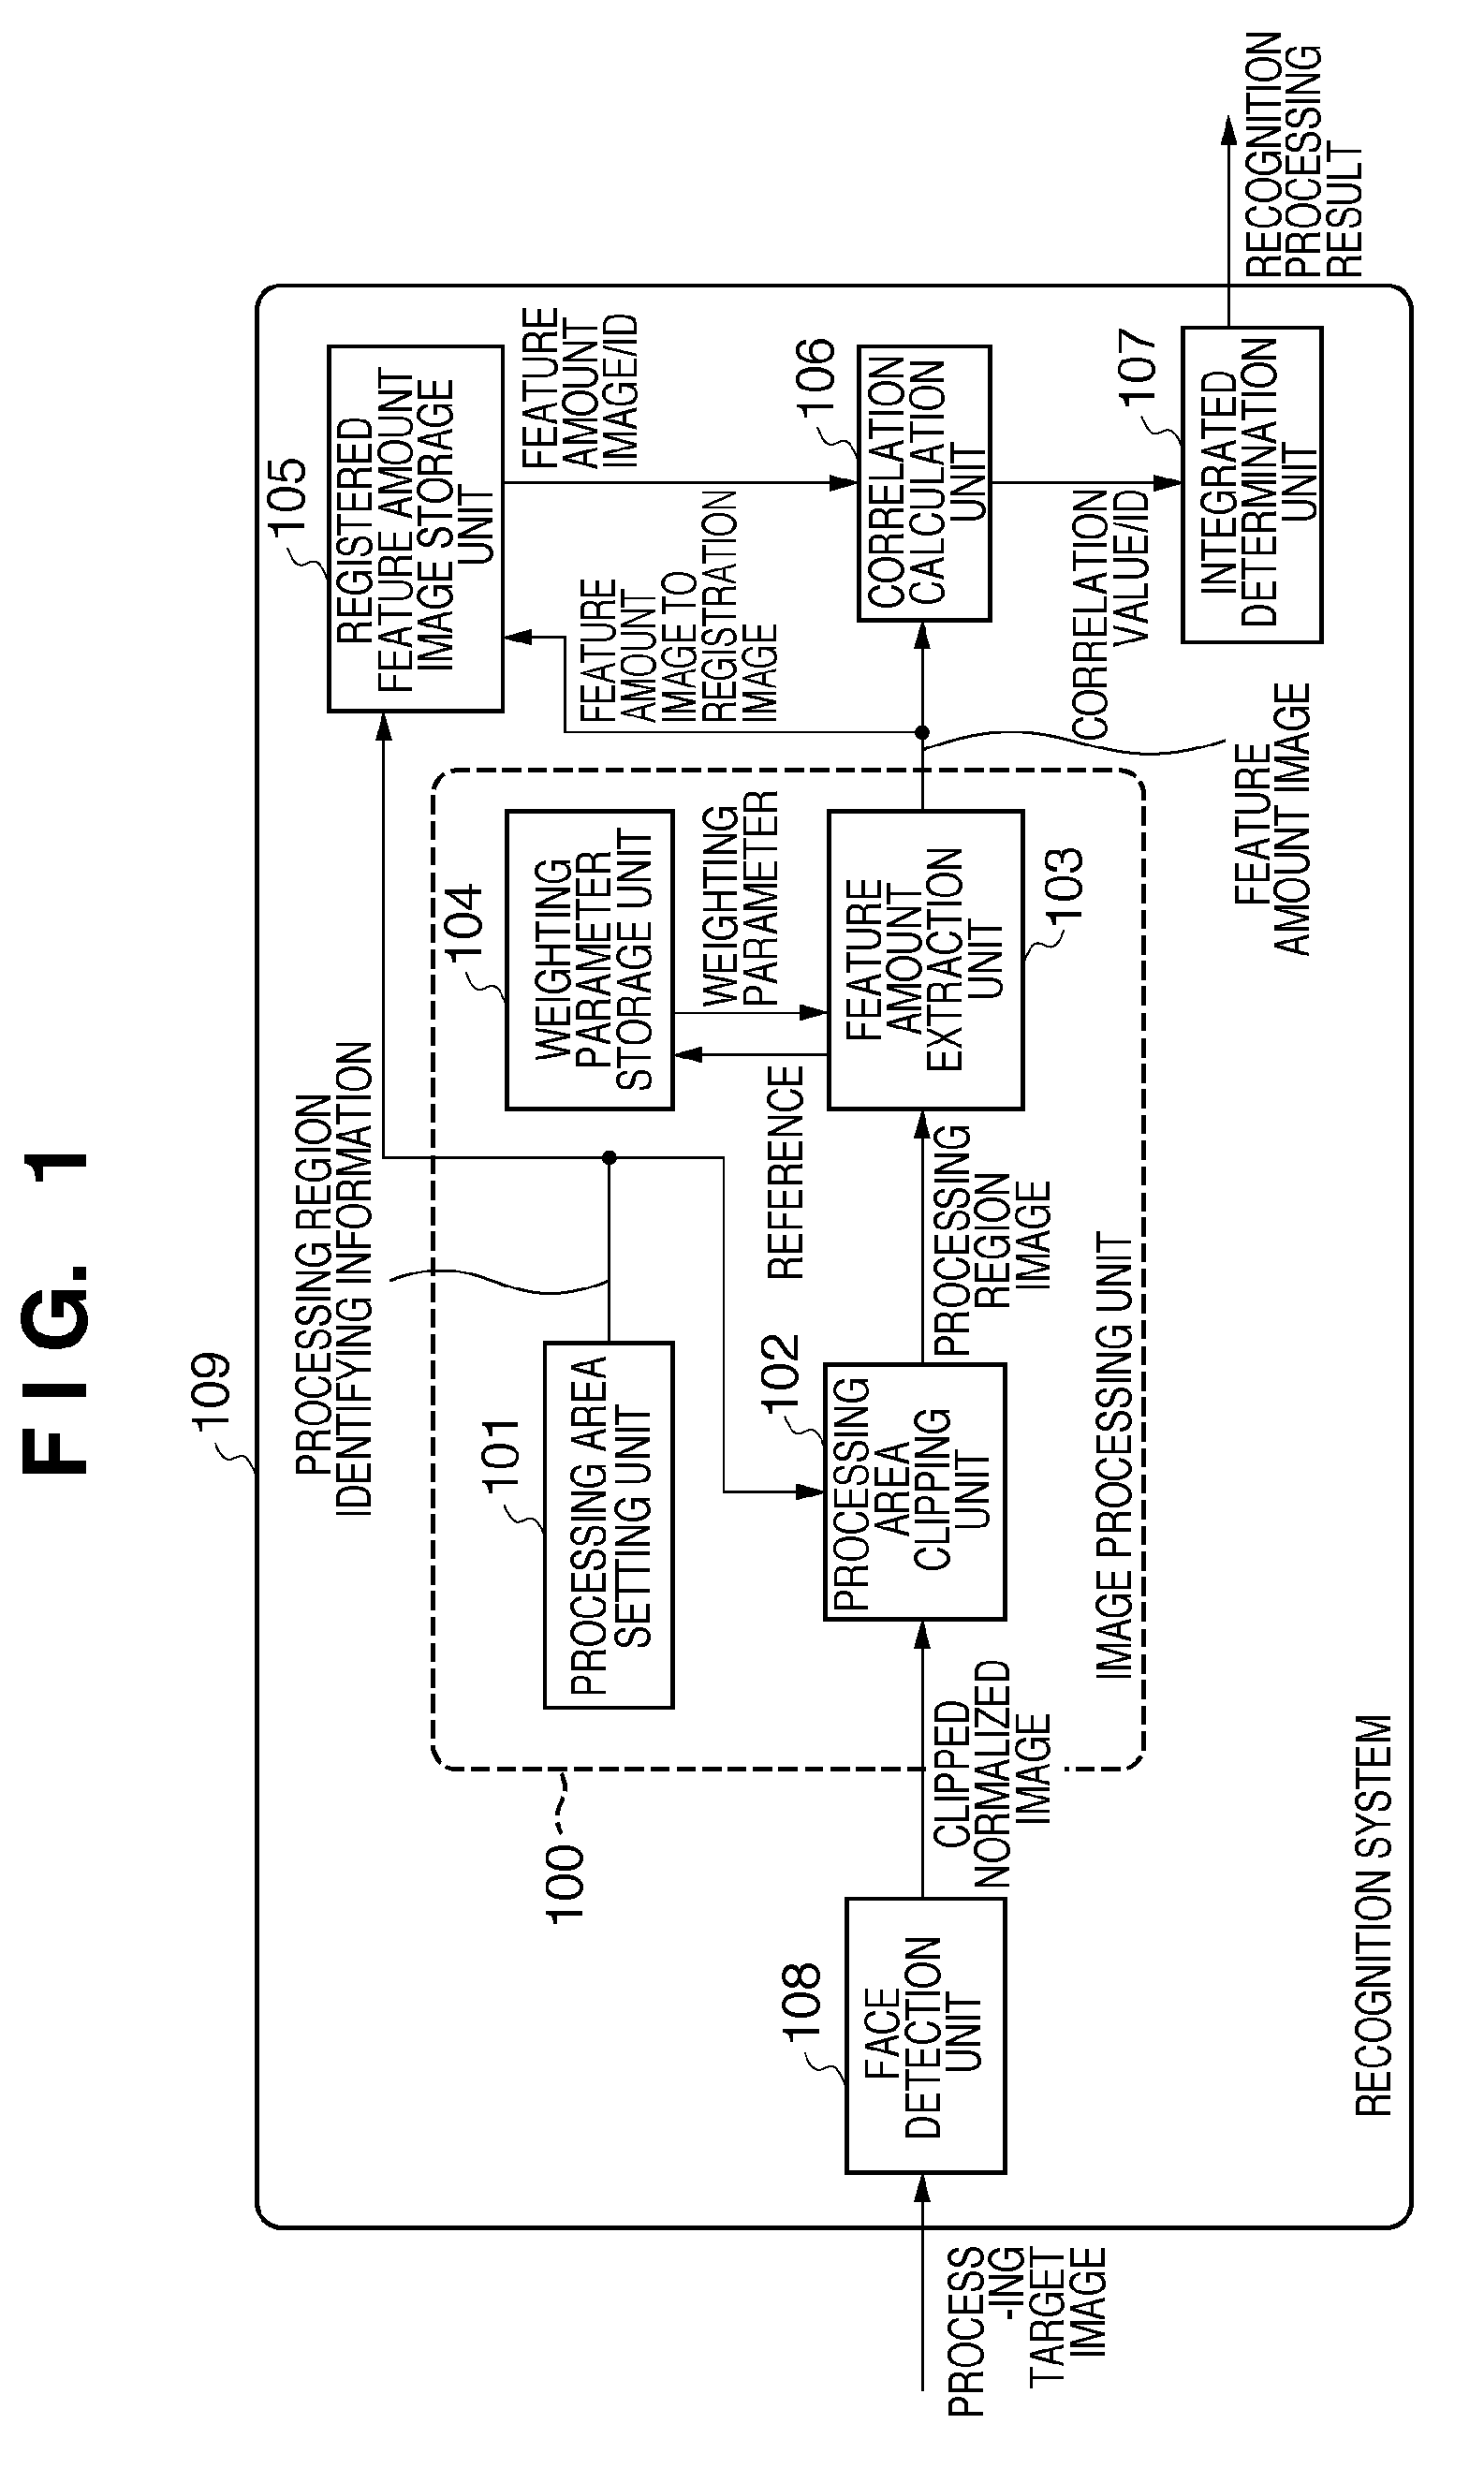 Image processing method, pattern detection method, pattern recognition method, and image processing device